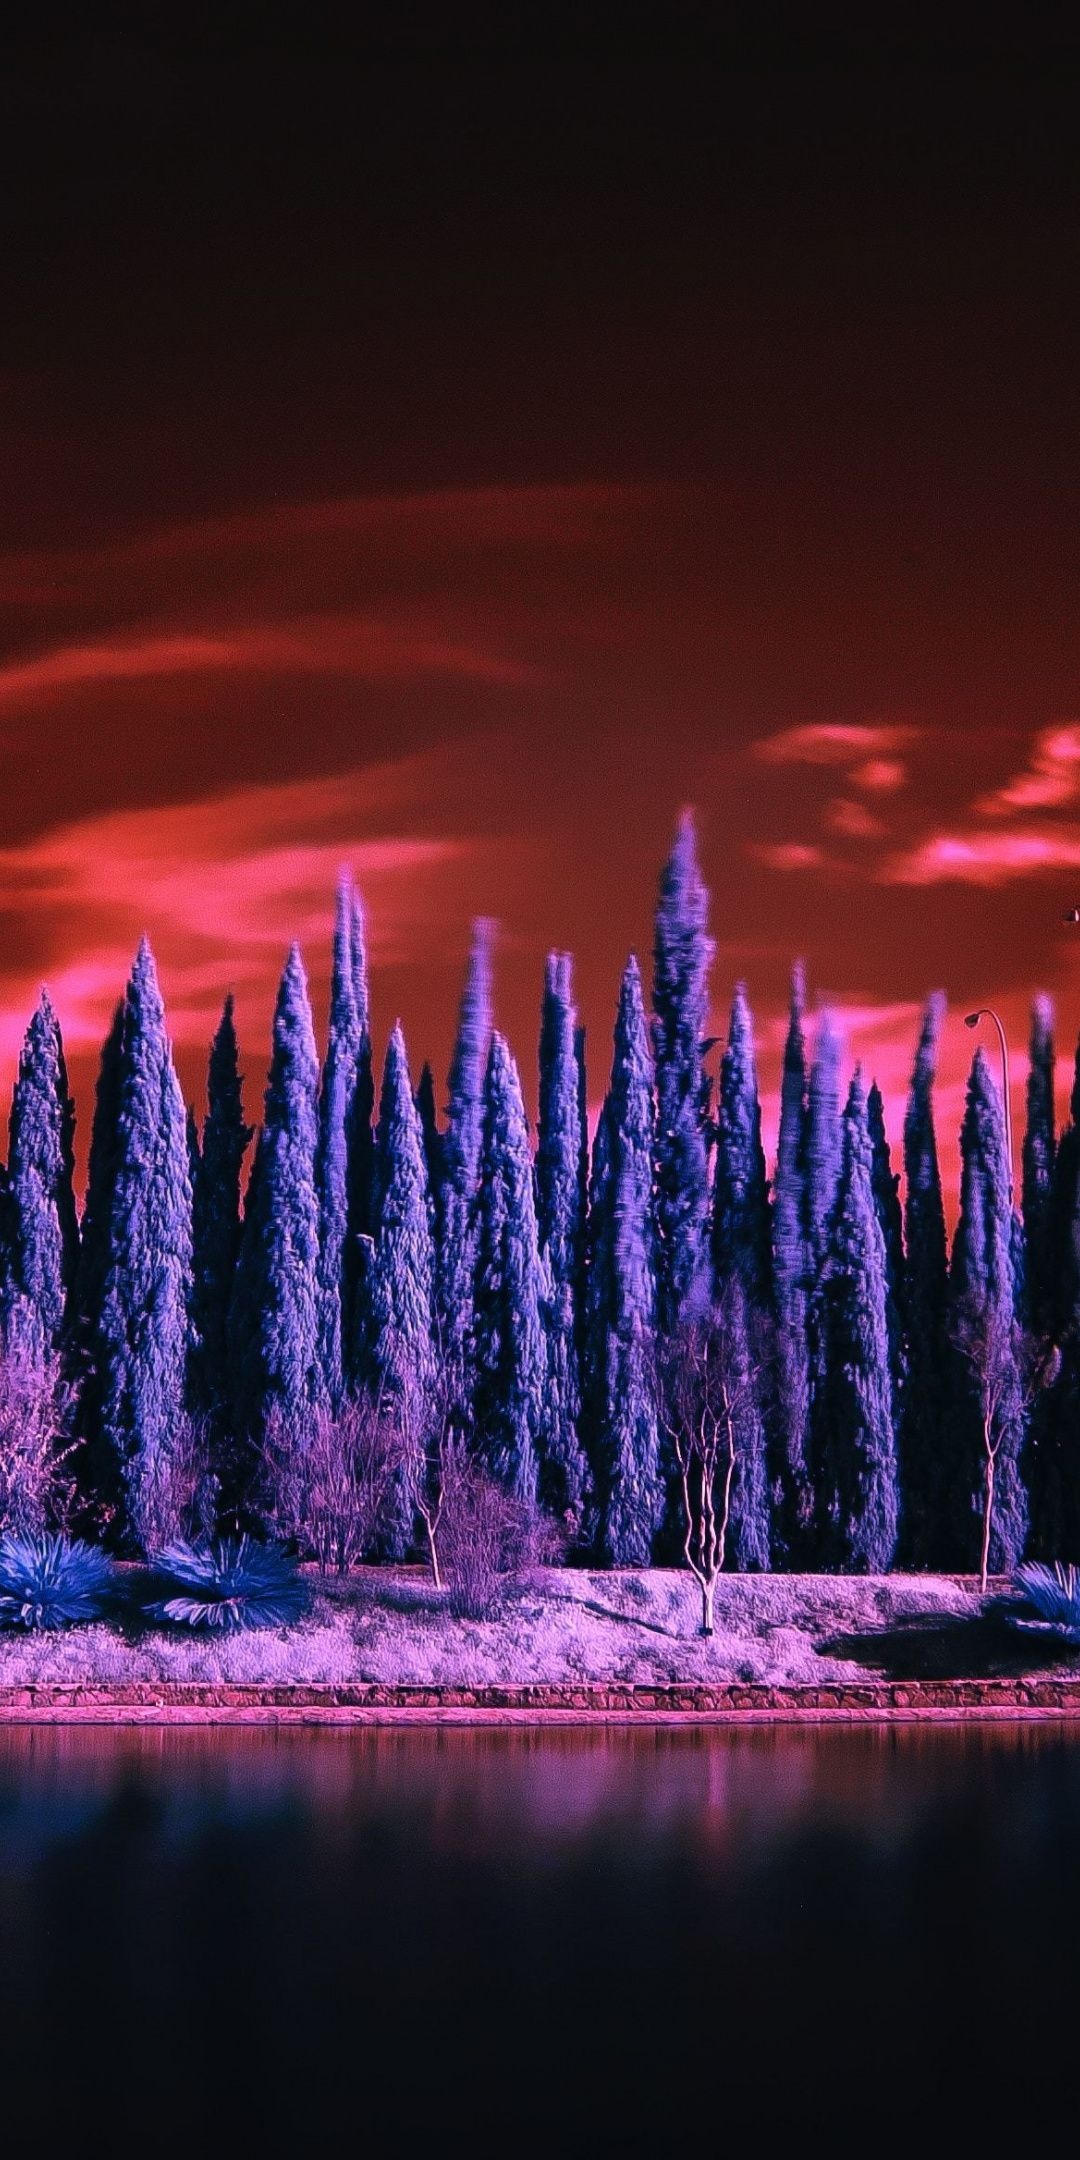 Cypress trees, Lake infrared, HD nature wallpapers, 1080x2160 HD Handy